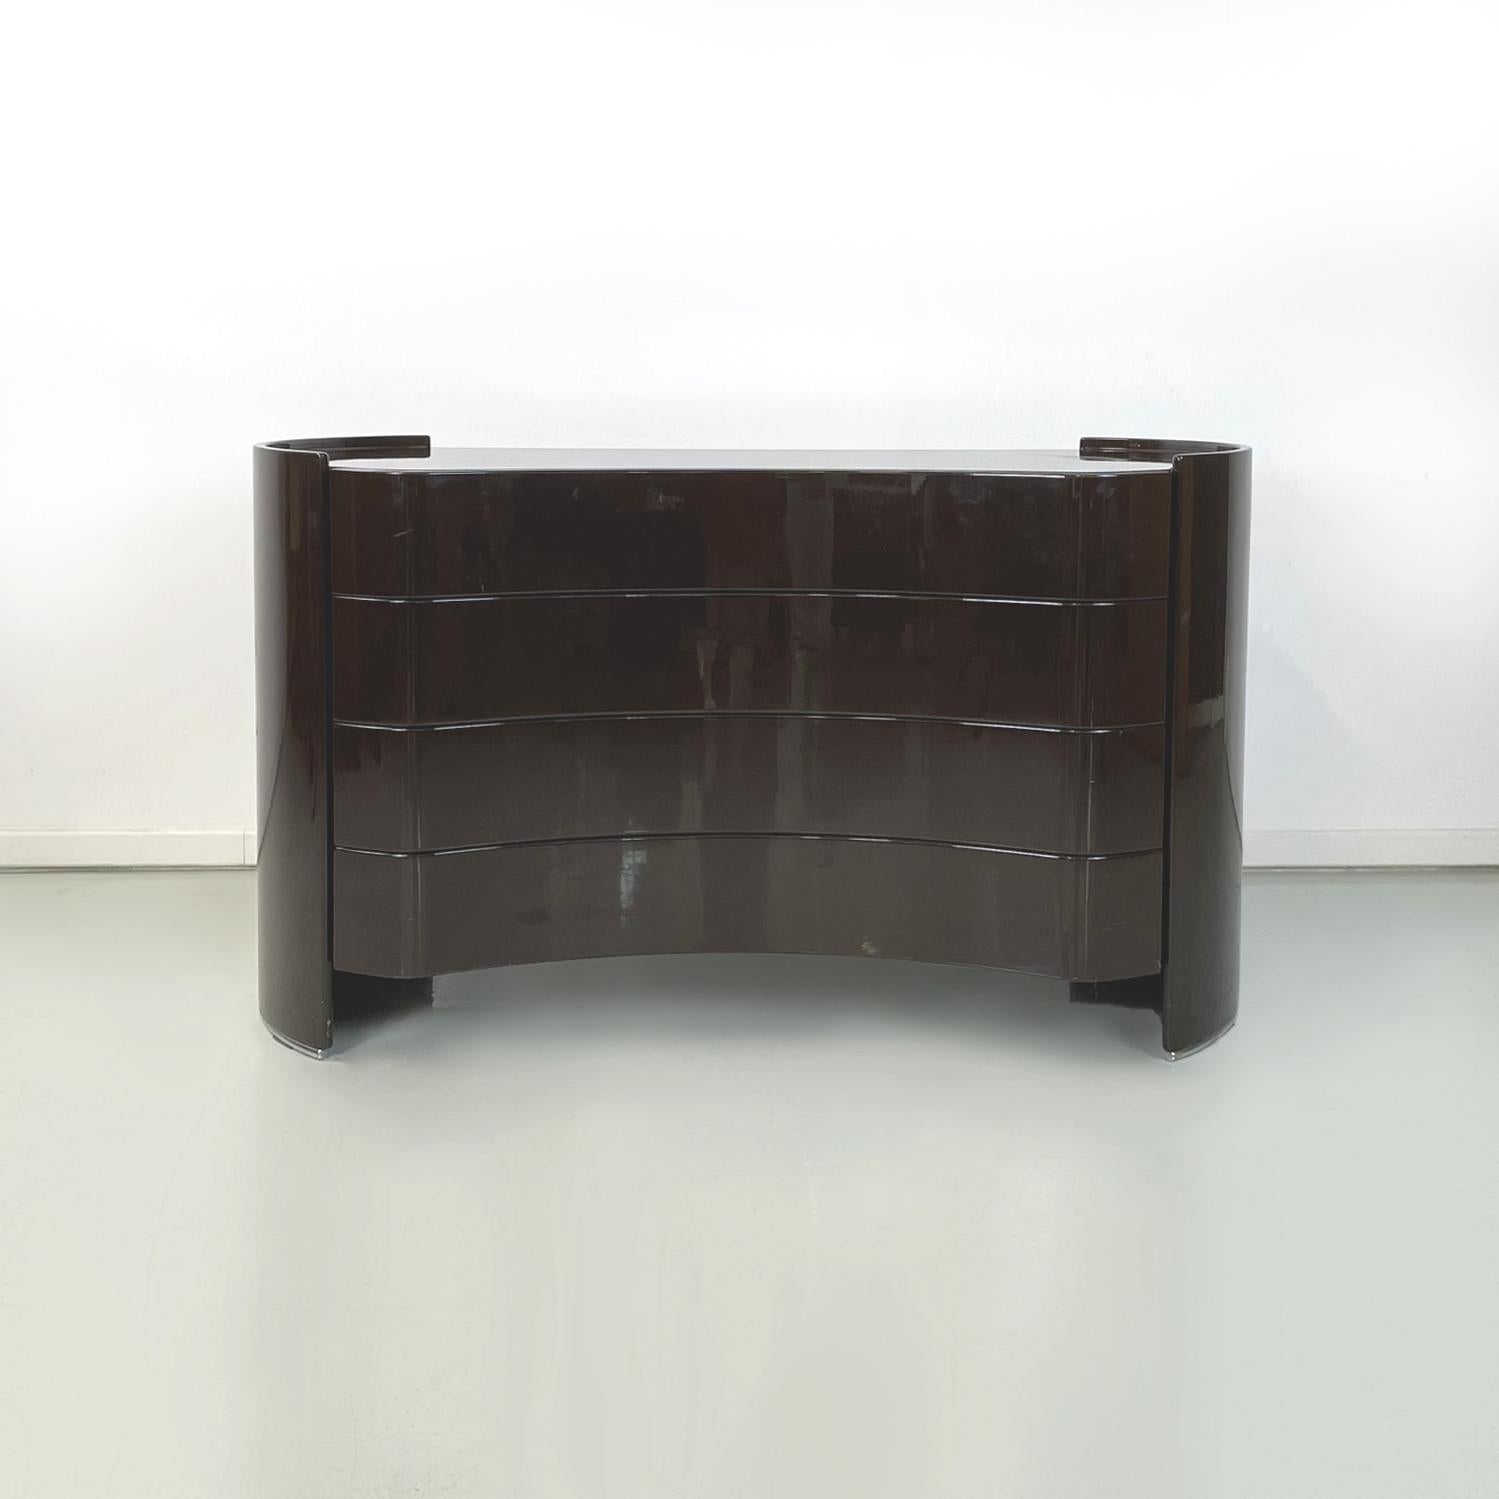 Italian modern Dark brown lacquered wooden chest of drawers Aiace by Benatti, 1970s
Chest of drawers with a rounded and sinuous shape, entirely in dark brown lacquered wood. On the front it has 4 drawers. On the sides it has two metal rod